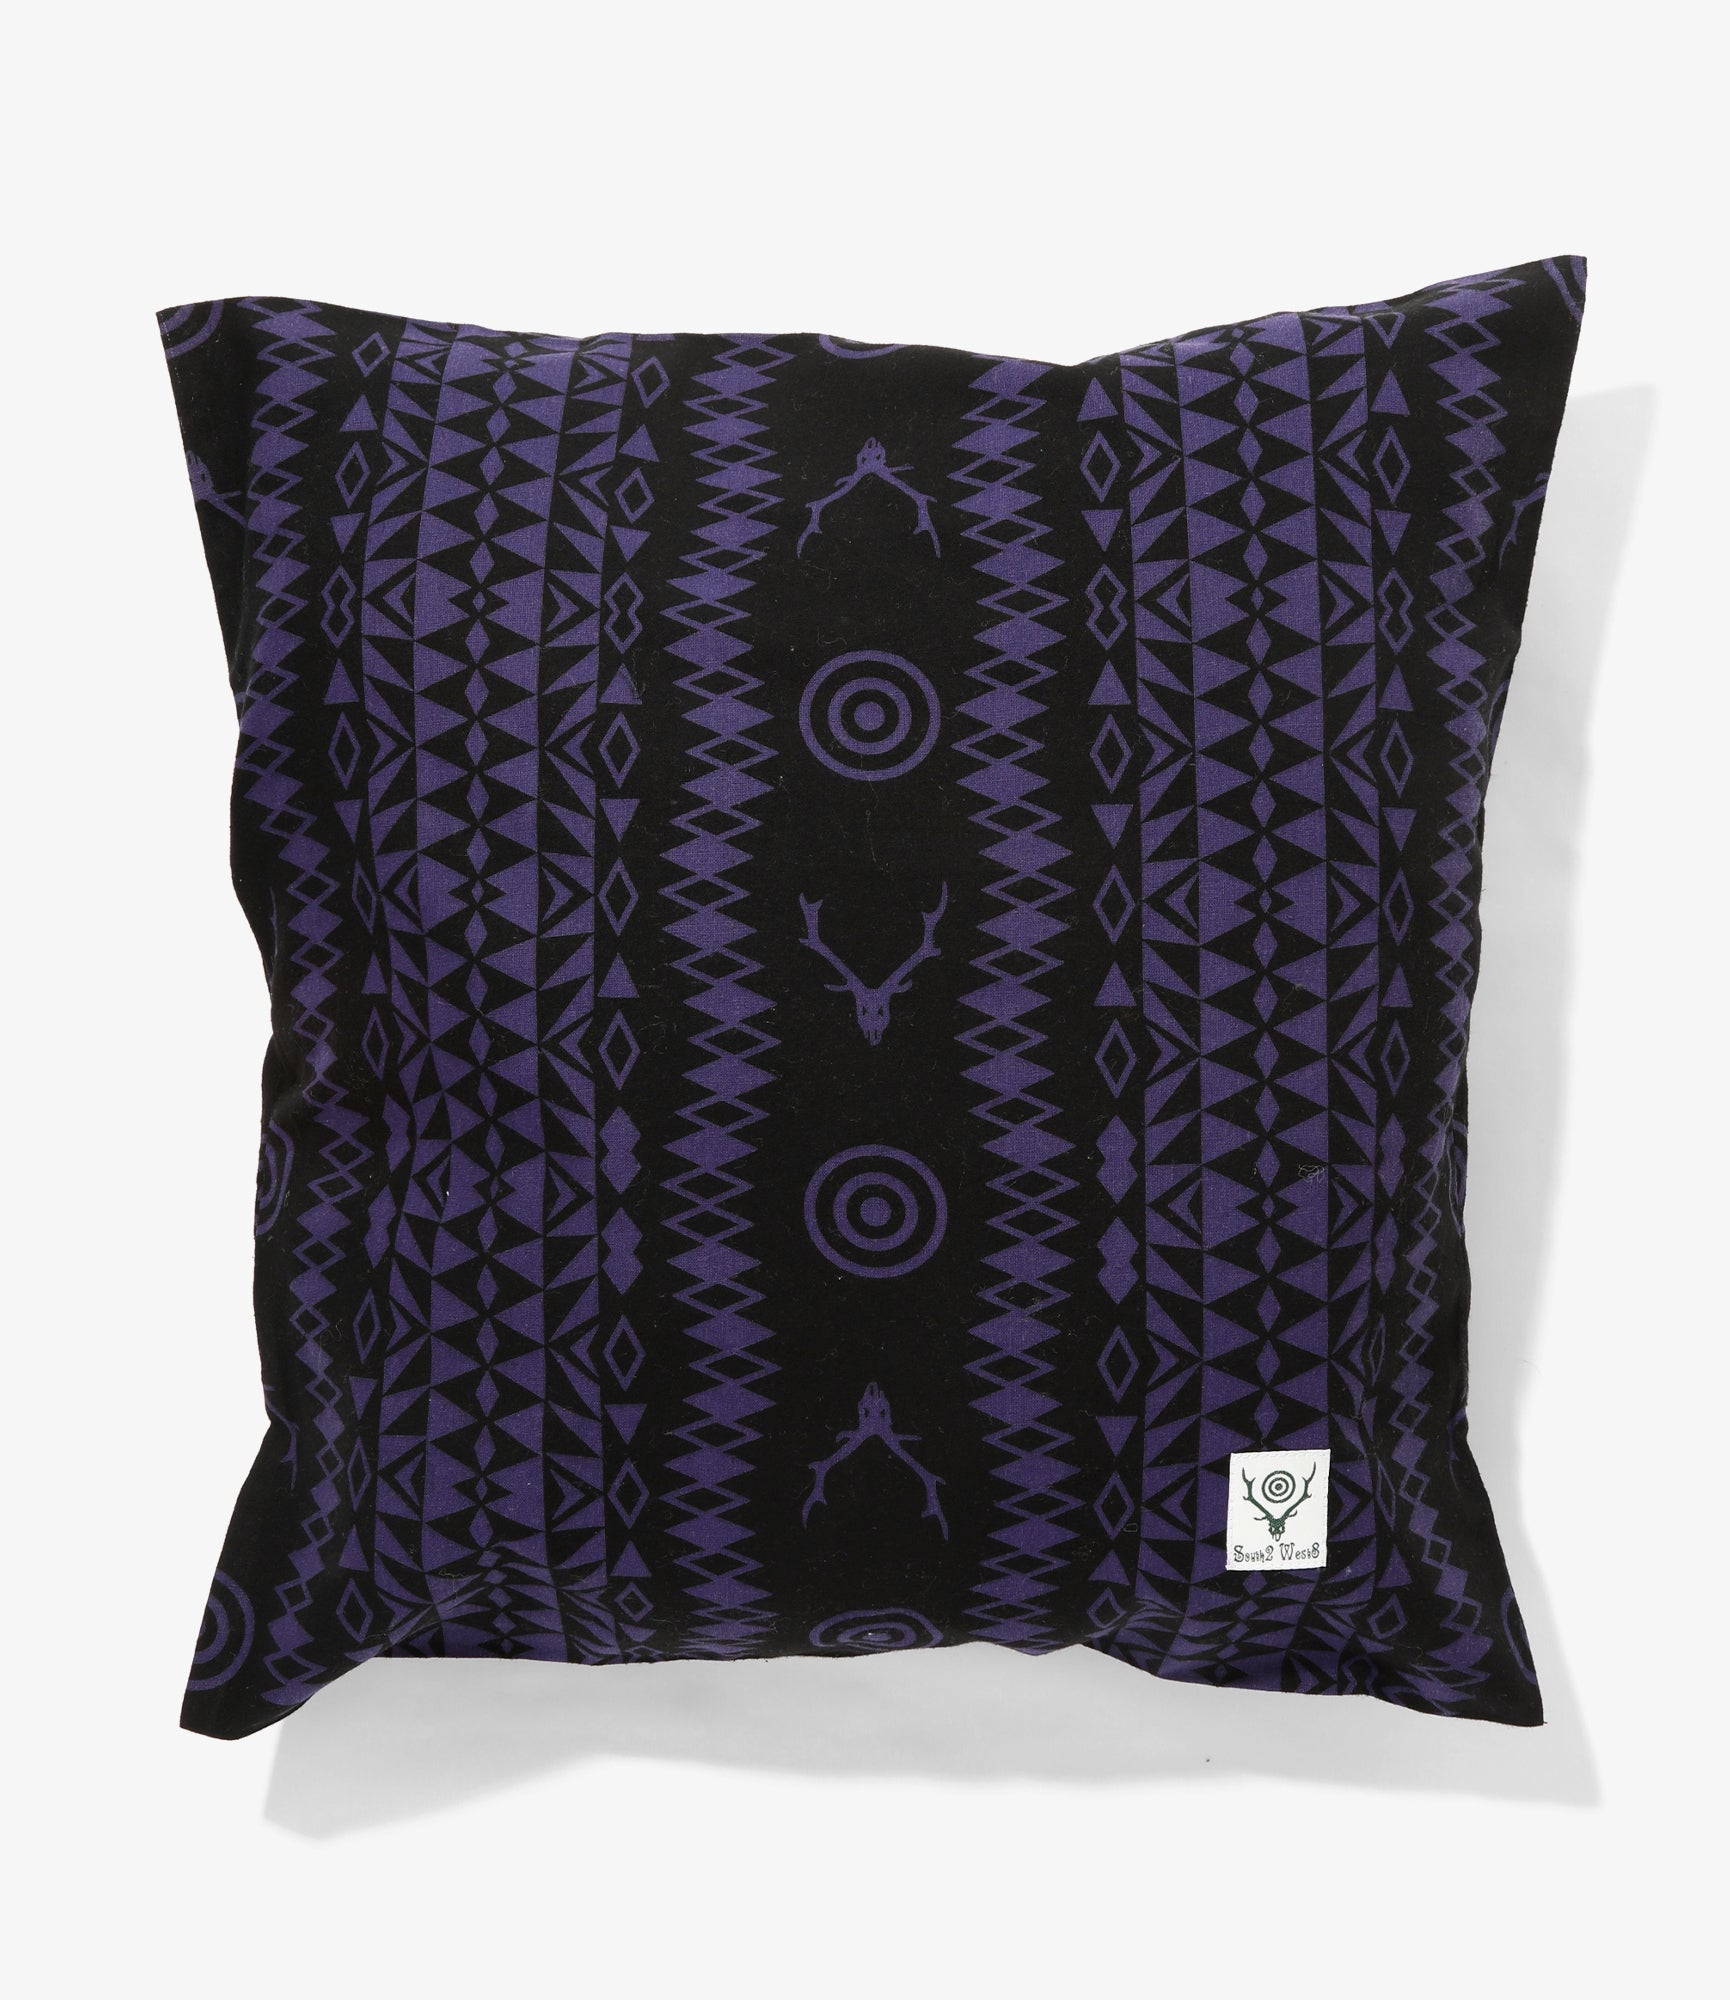 South2 West8 Cushion Cover - Flannel Cloth / Printed - Skull&Target